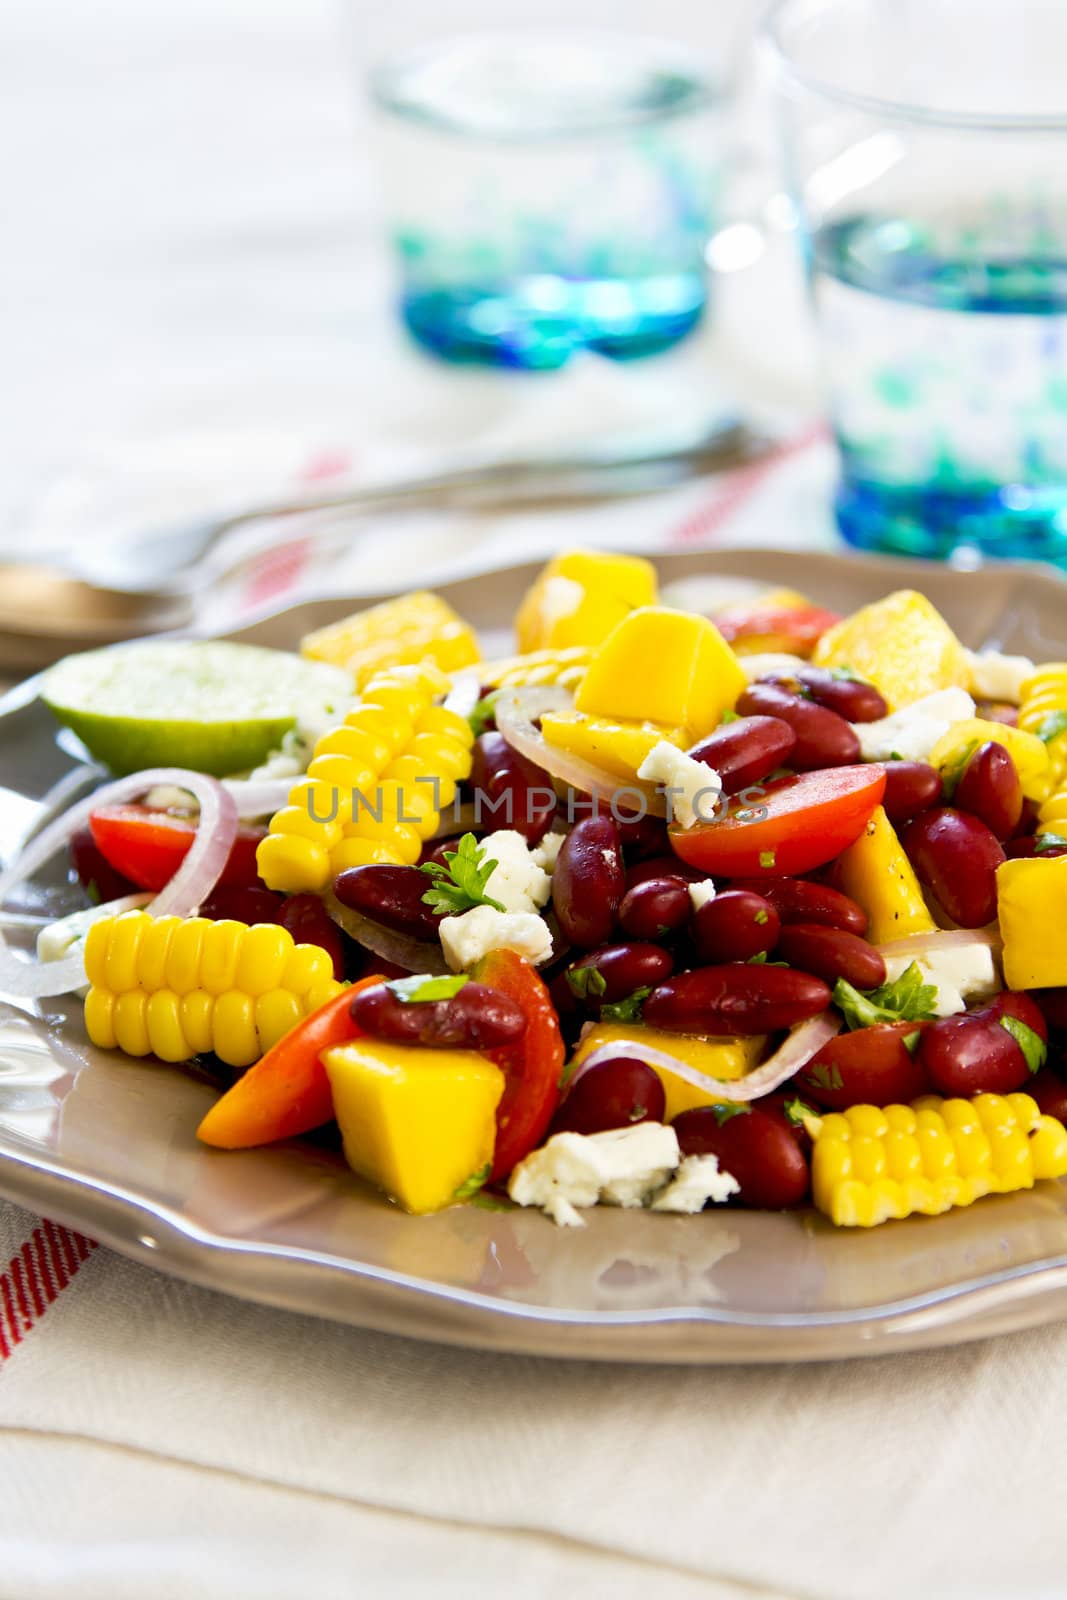 Beans with  Mango and Feta cheese salad by vanillaechoes